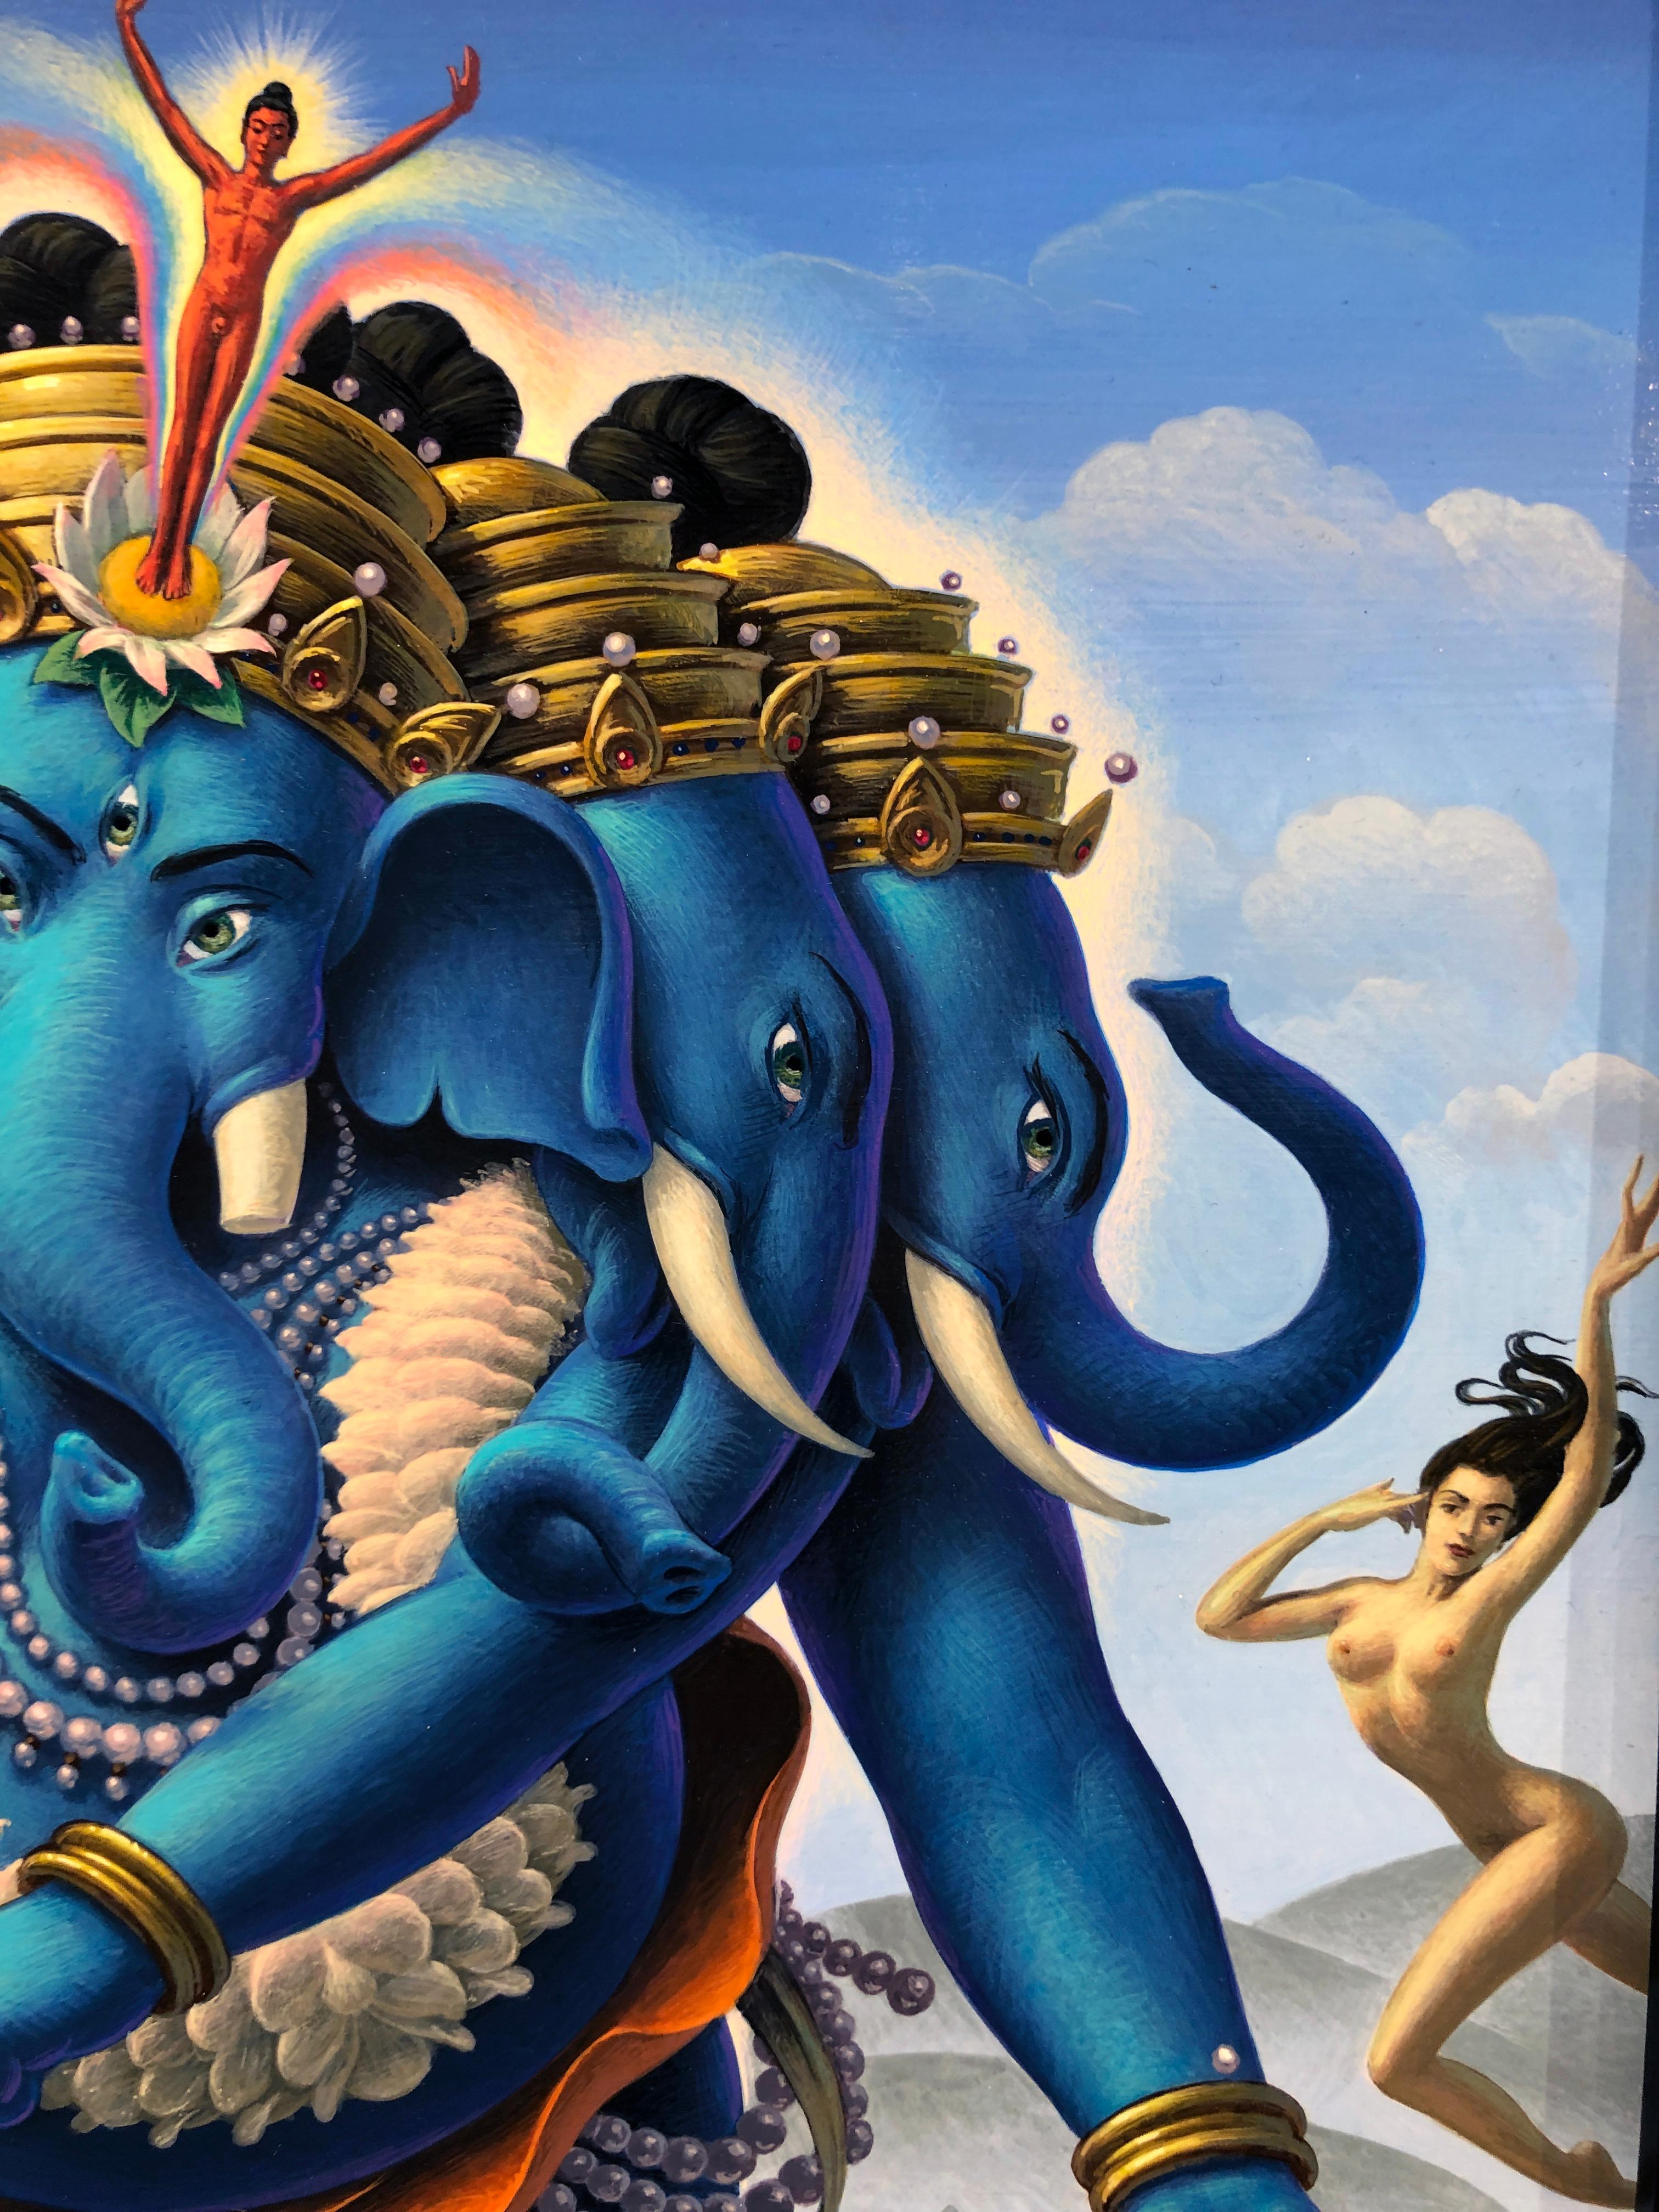 Ganesh at the Maelstrom - Highly Detailed Surreal, Symbolic Painting 3